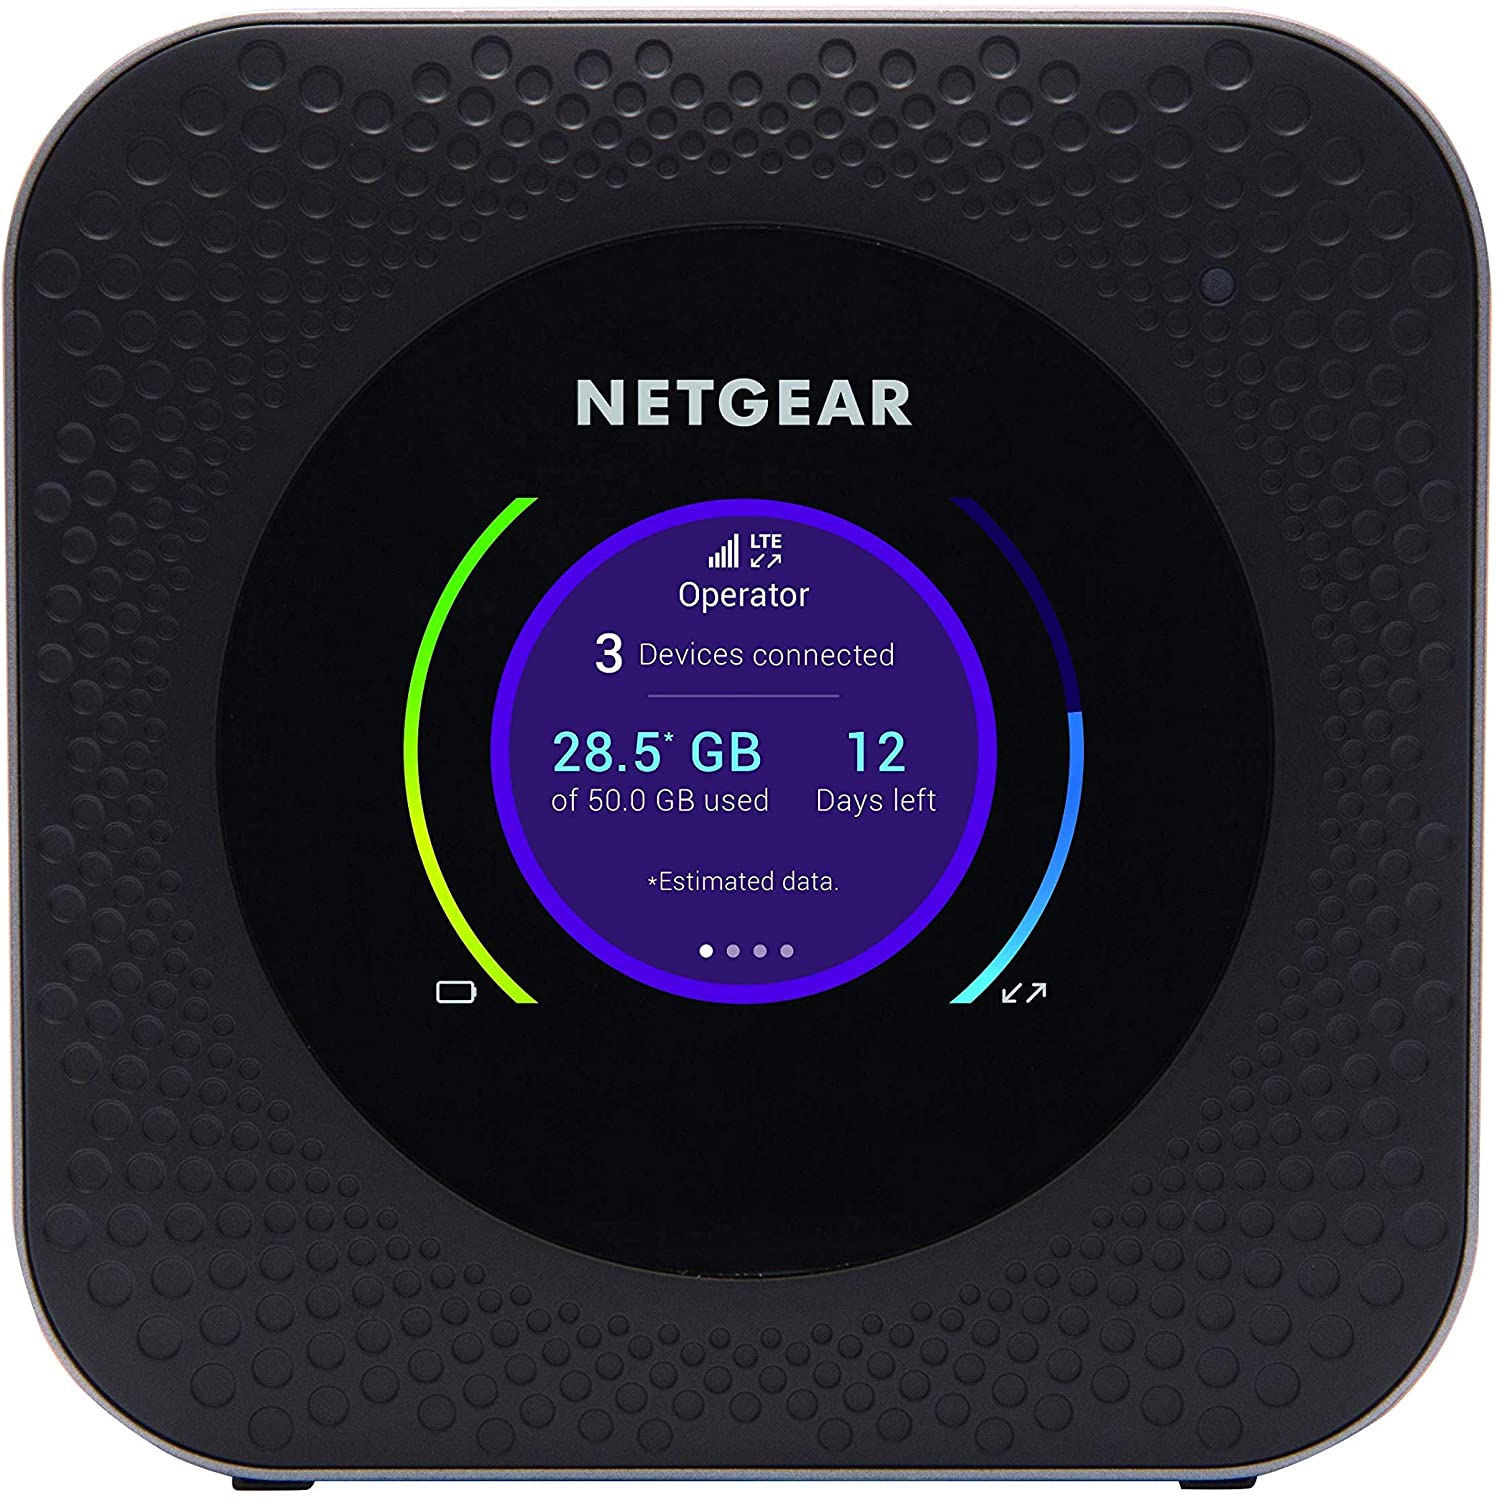 NETGEAR Nighthawk MR1100 Mobile Hotspot 4G Router, Mifi, Portable Wi-Fi for Travel, Super Fast Download Speeds Up to 1 Gbps, Unlocked for All Networks